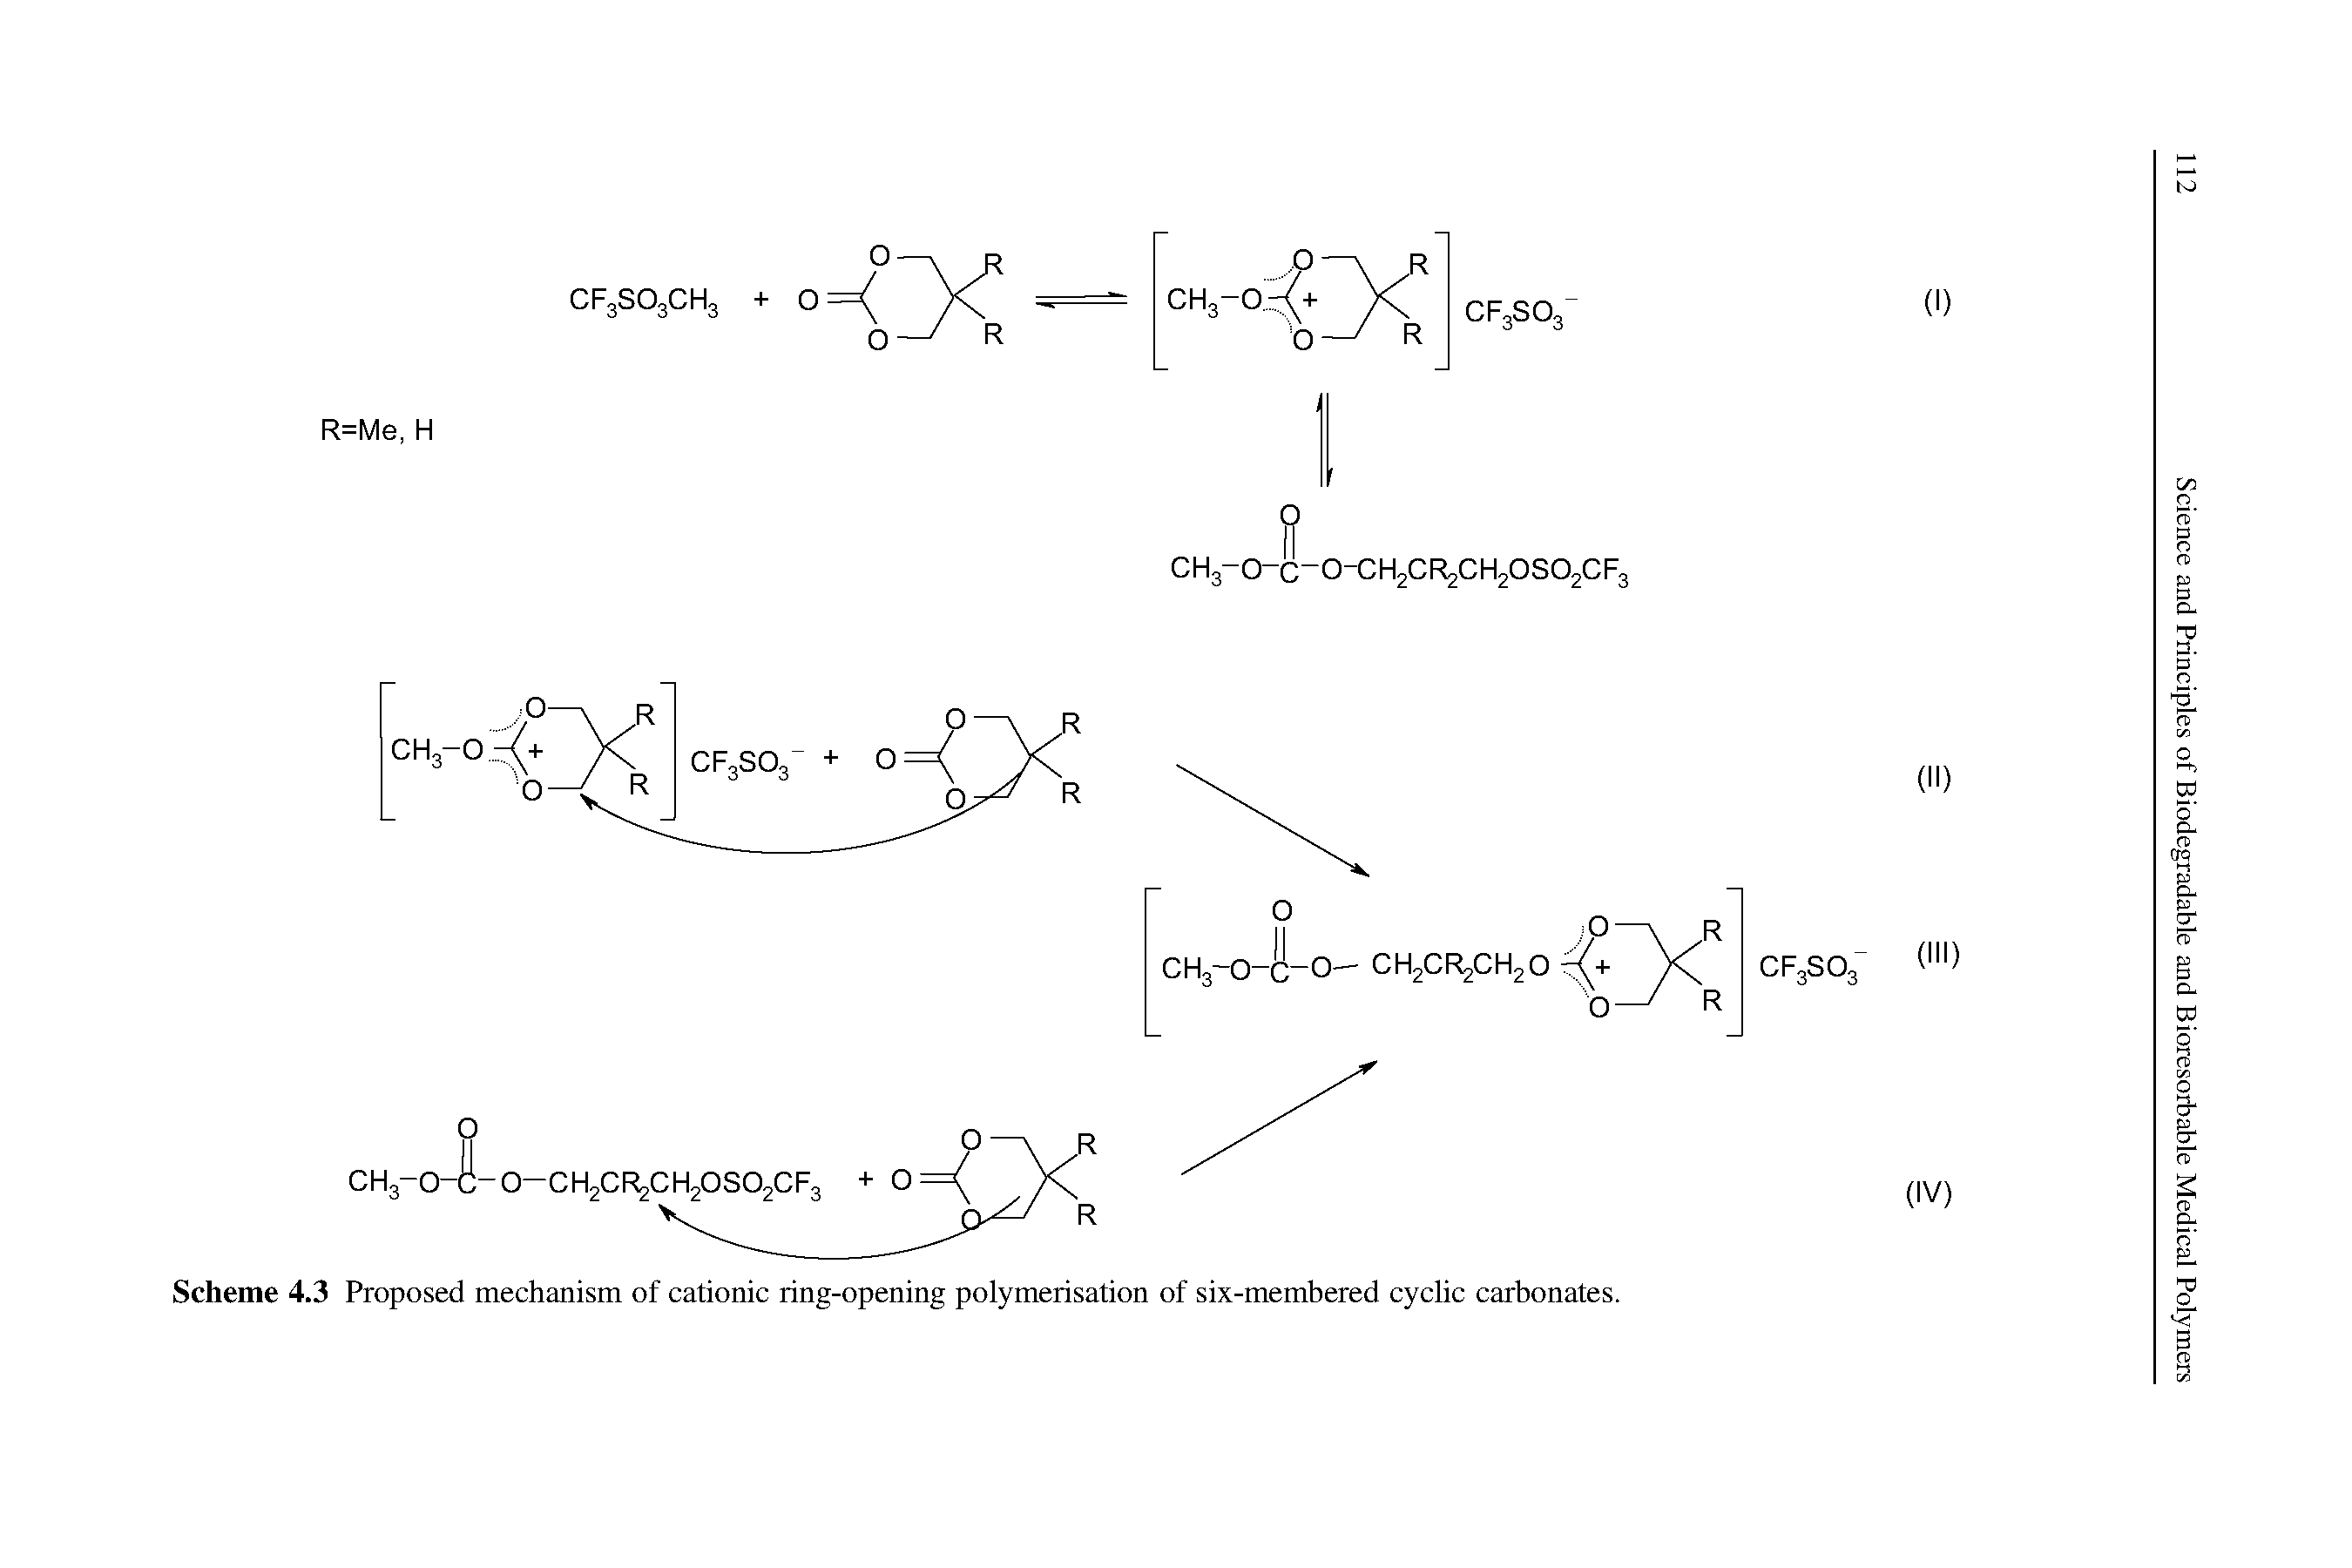 Scheme 4.3 Proposed mechanism of cationic ring-opening polymerisation of six-membered cyclic carbonates.